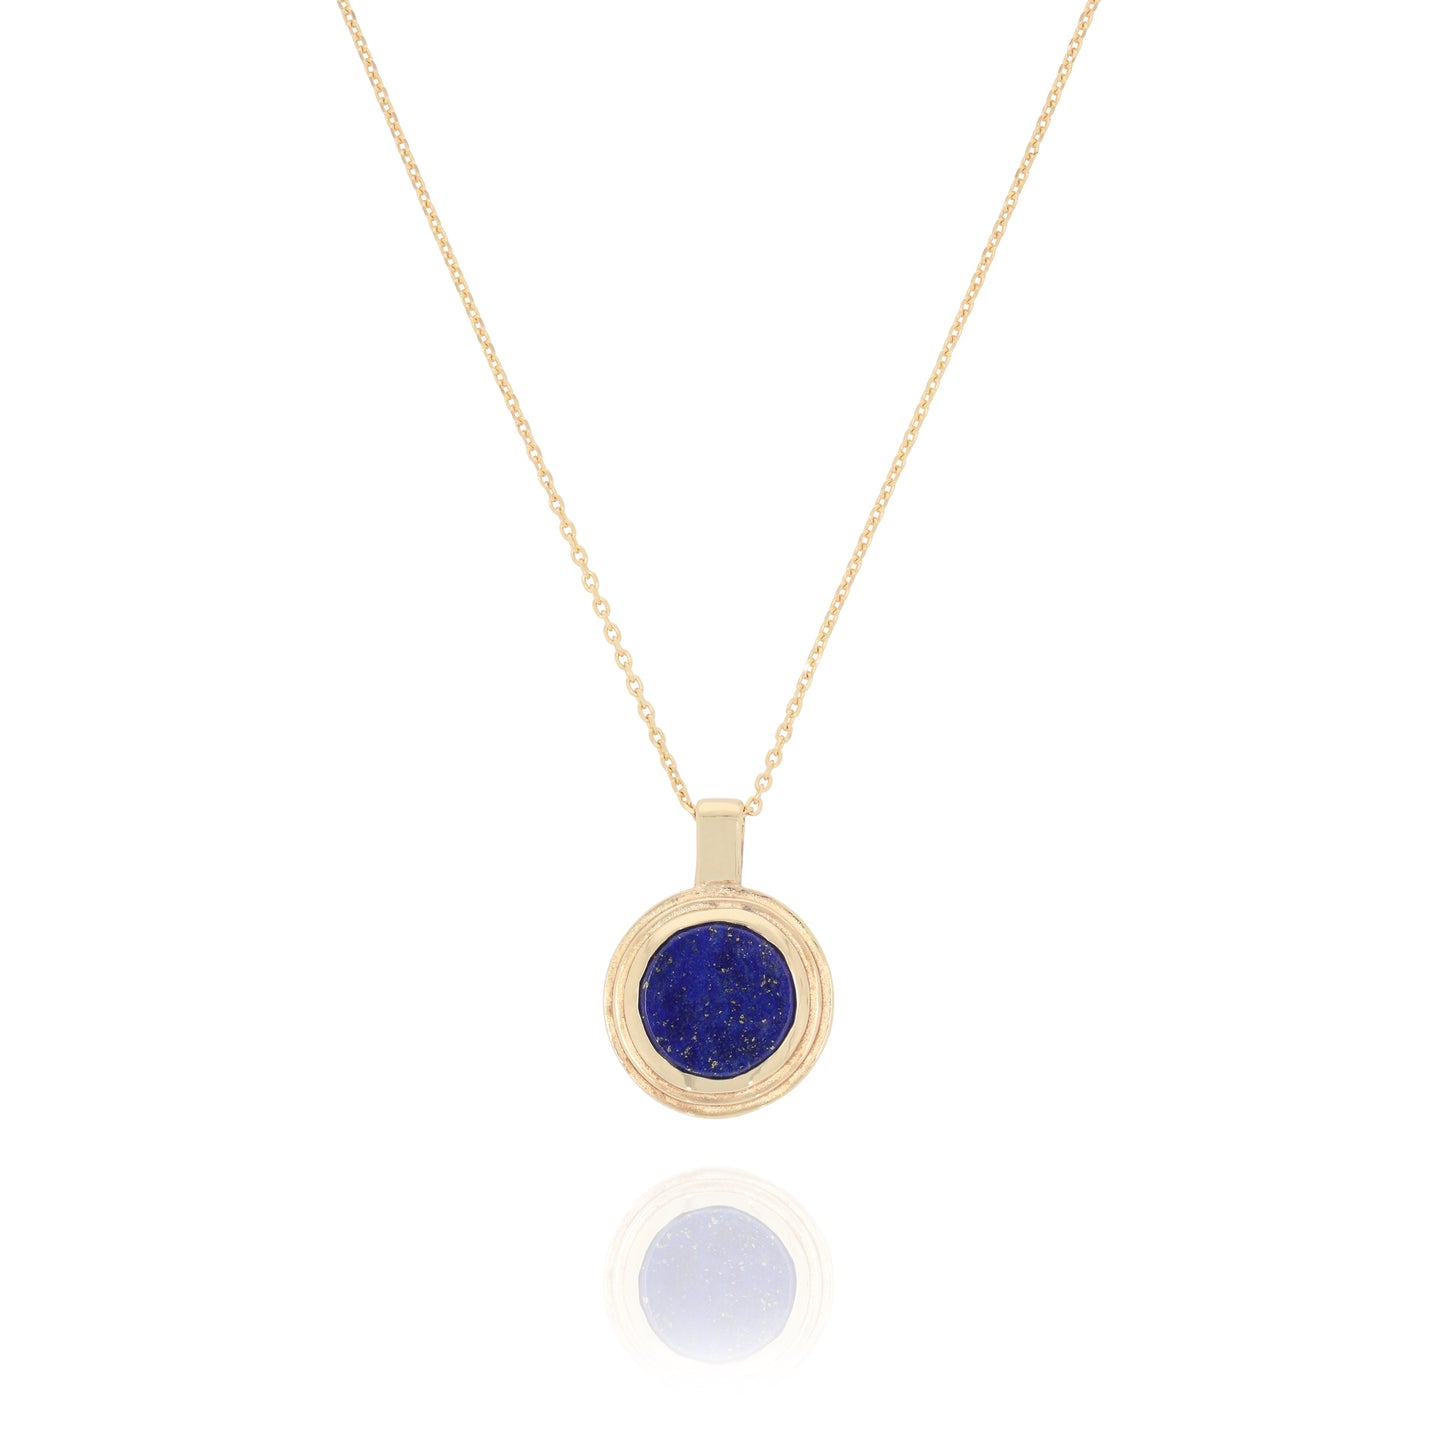 ASCENT Gold Necklace with Lapis Lazuli Stone